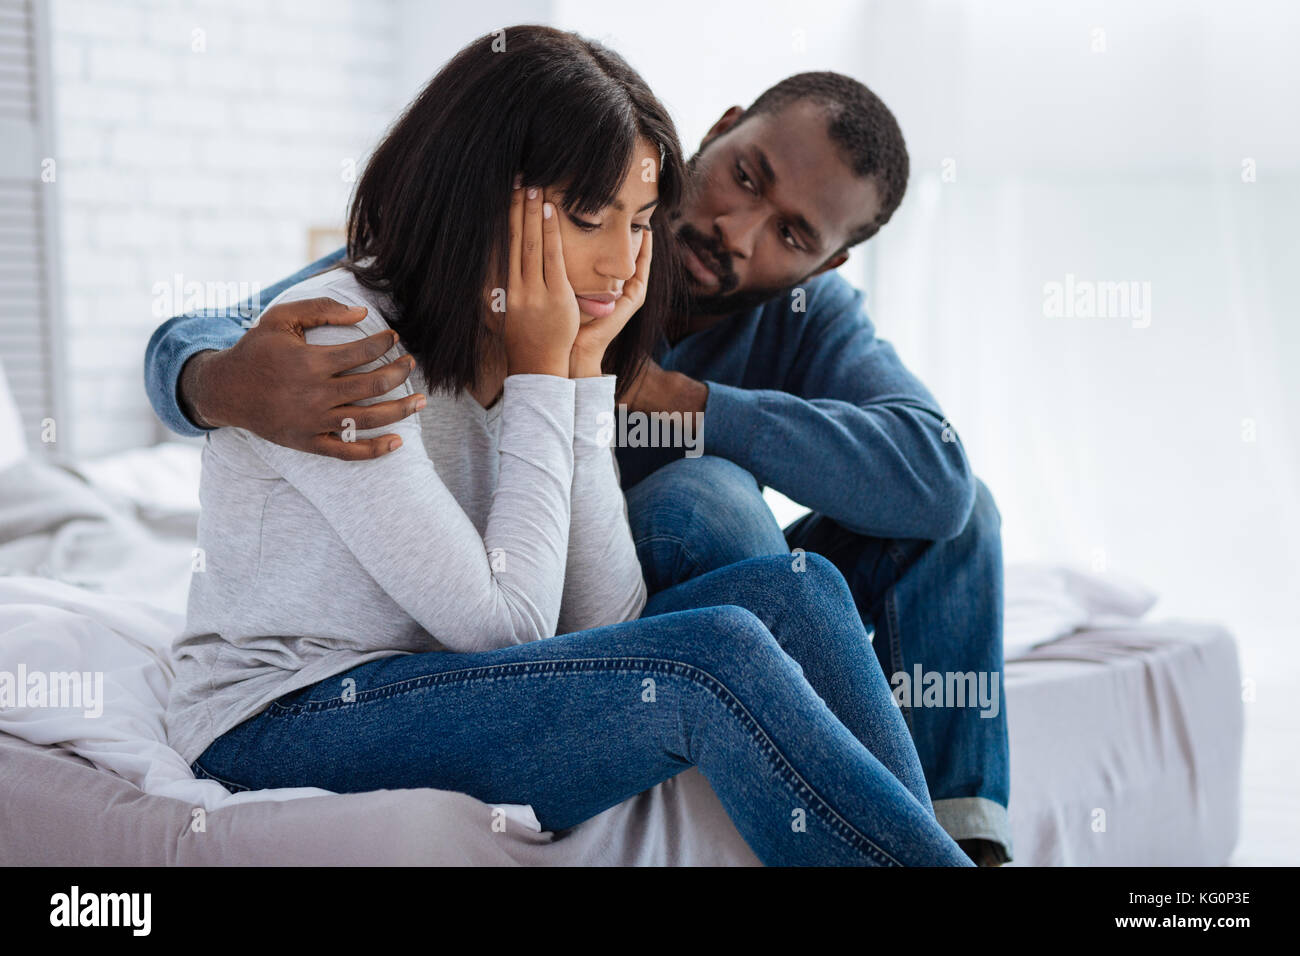 Kind attentive man supporting his sad girlfriend Stock Photo